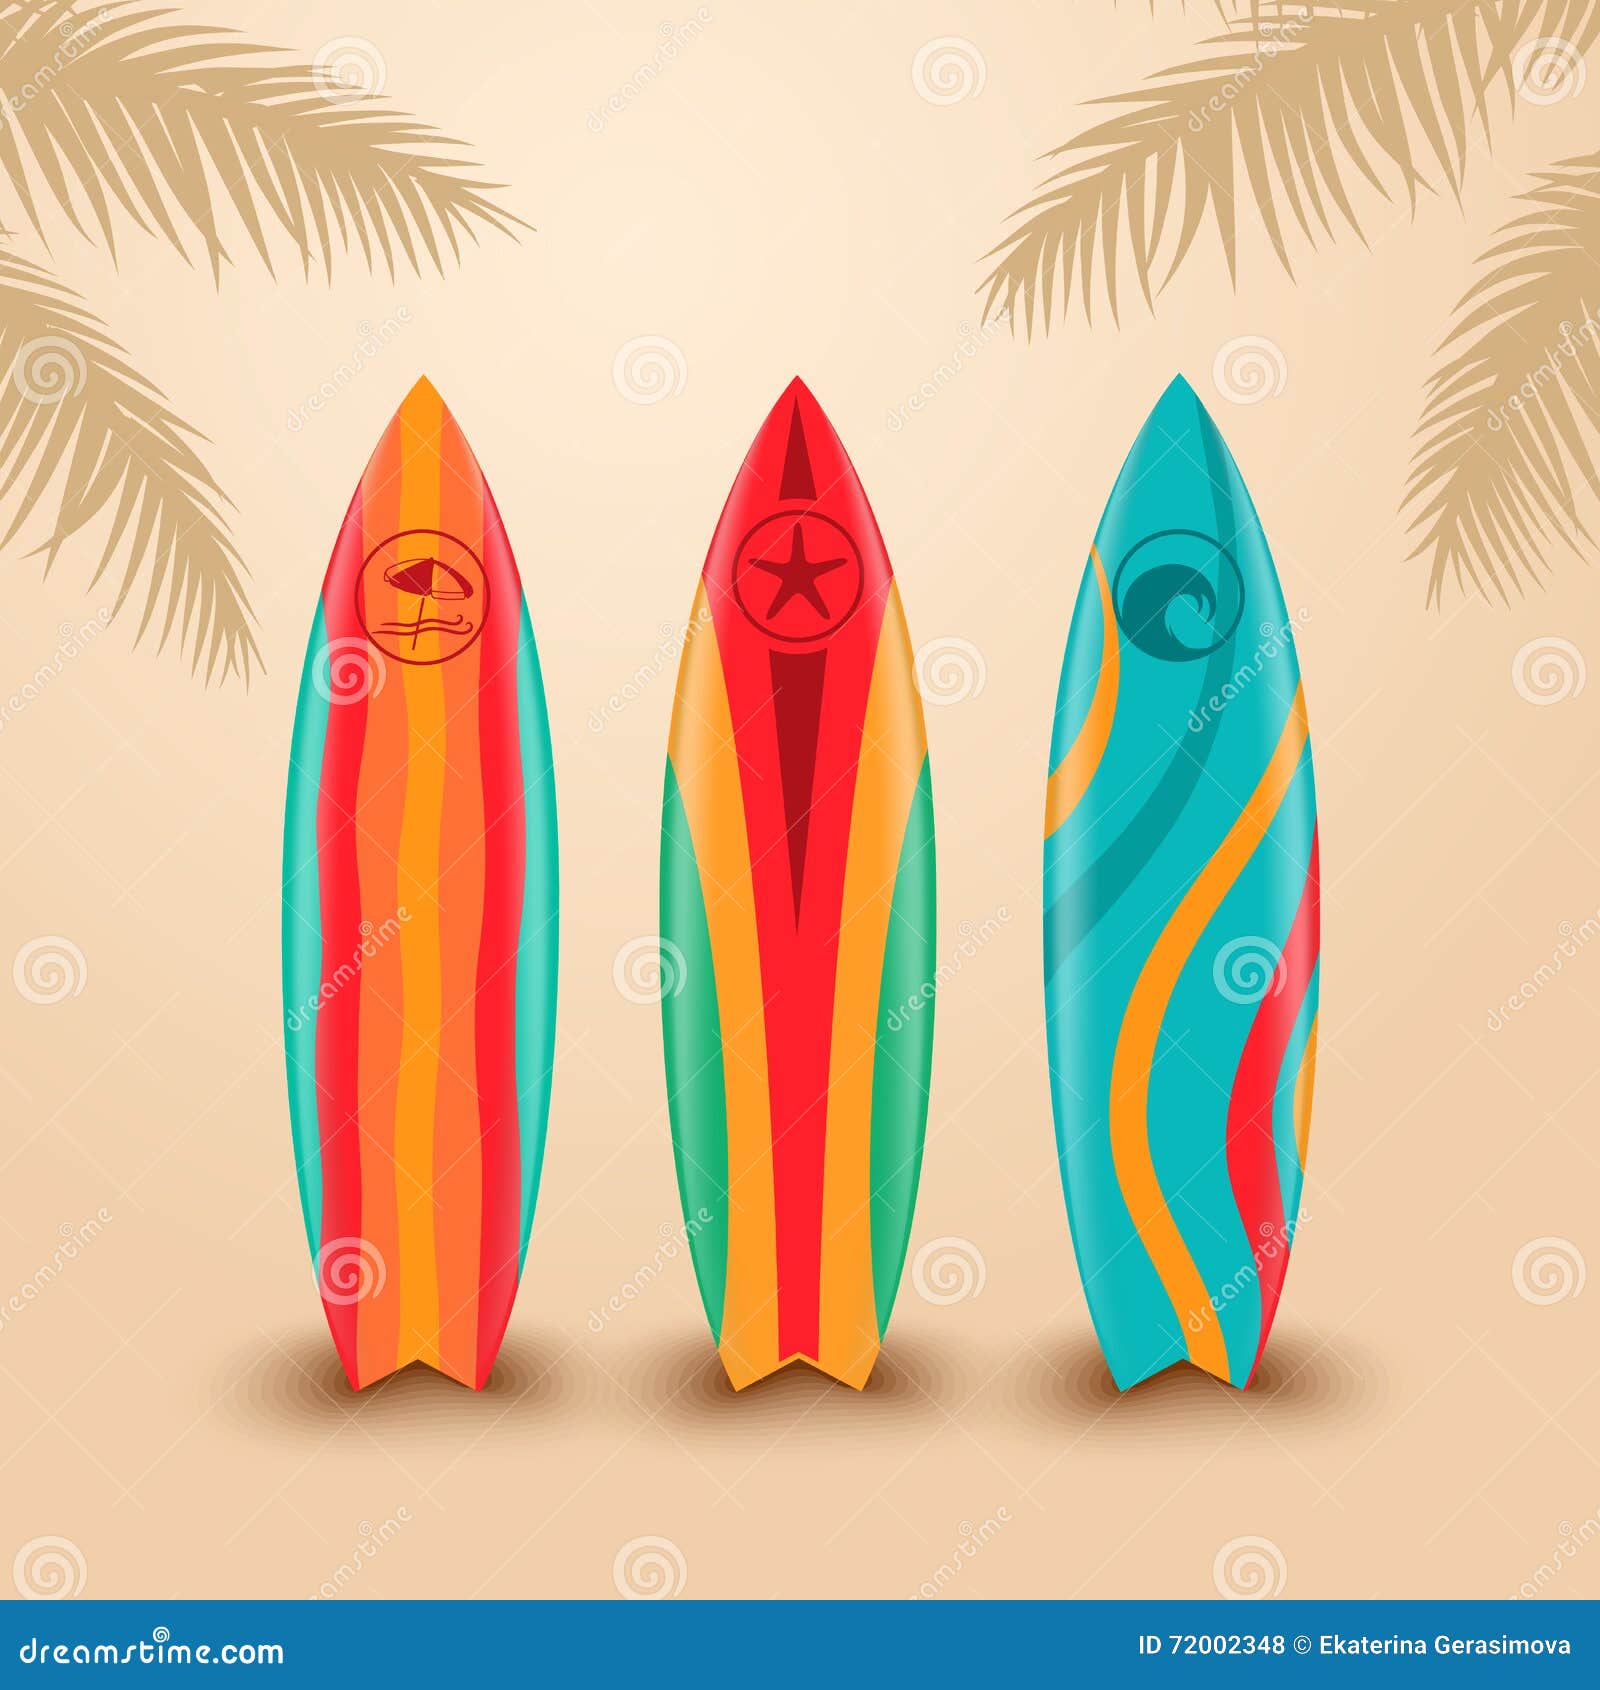 surf boards with different .  